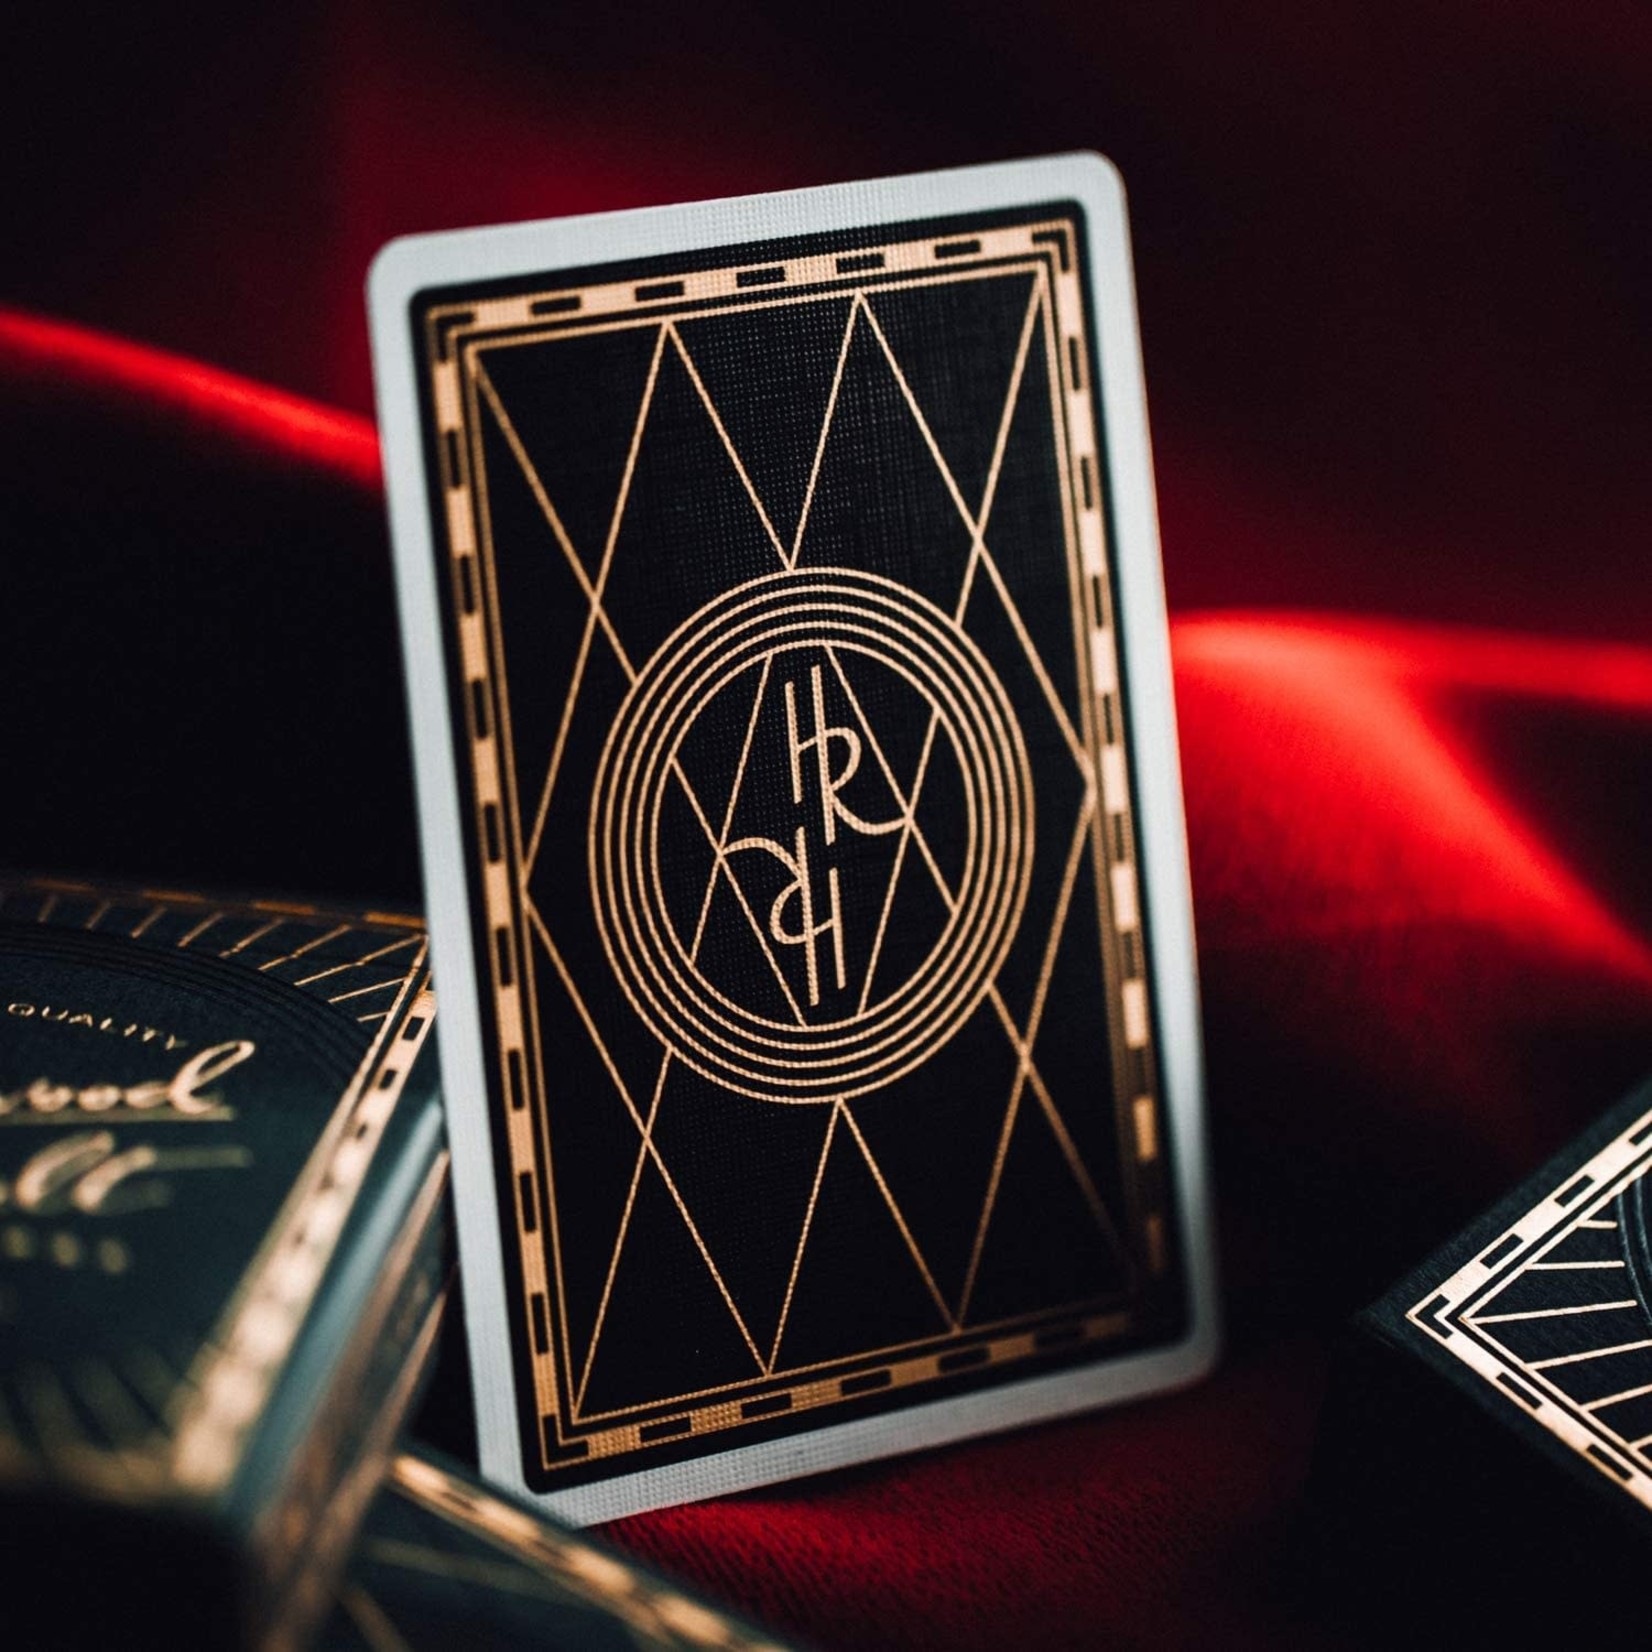 theory11 Premium Playing Cards: Hollywood Roosevelt